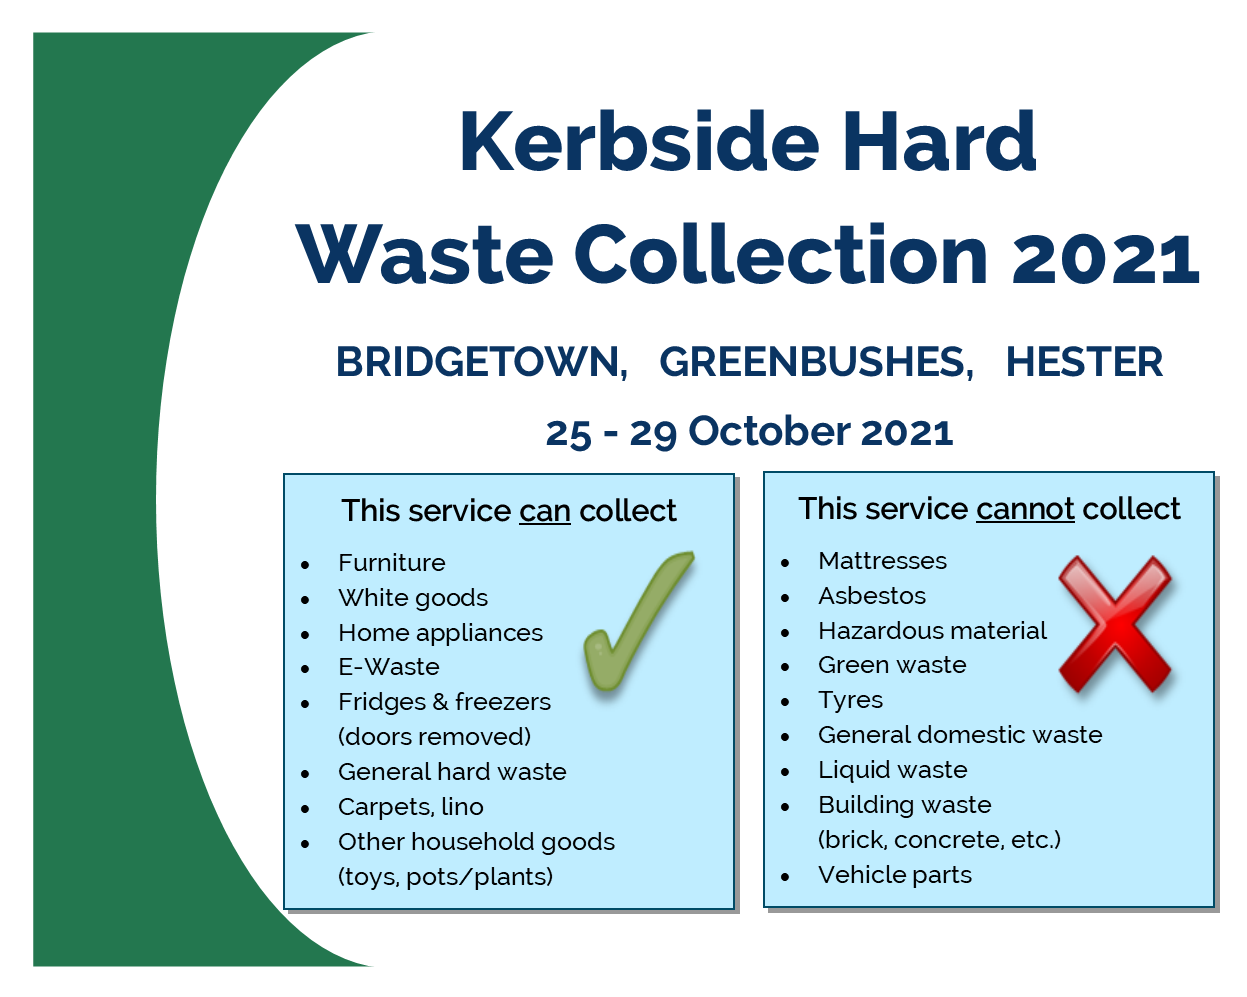 Kerbside Hard Waste Collection